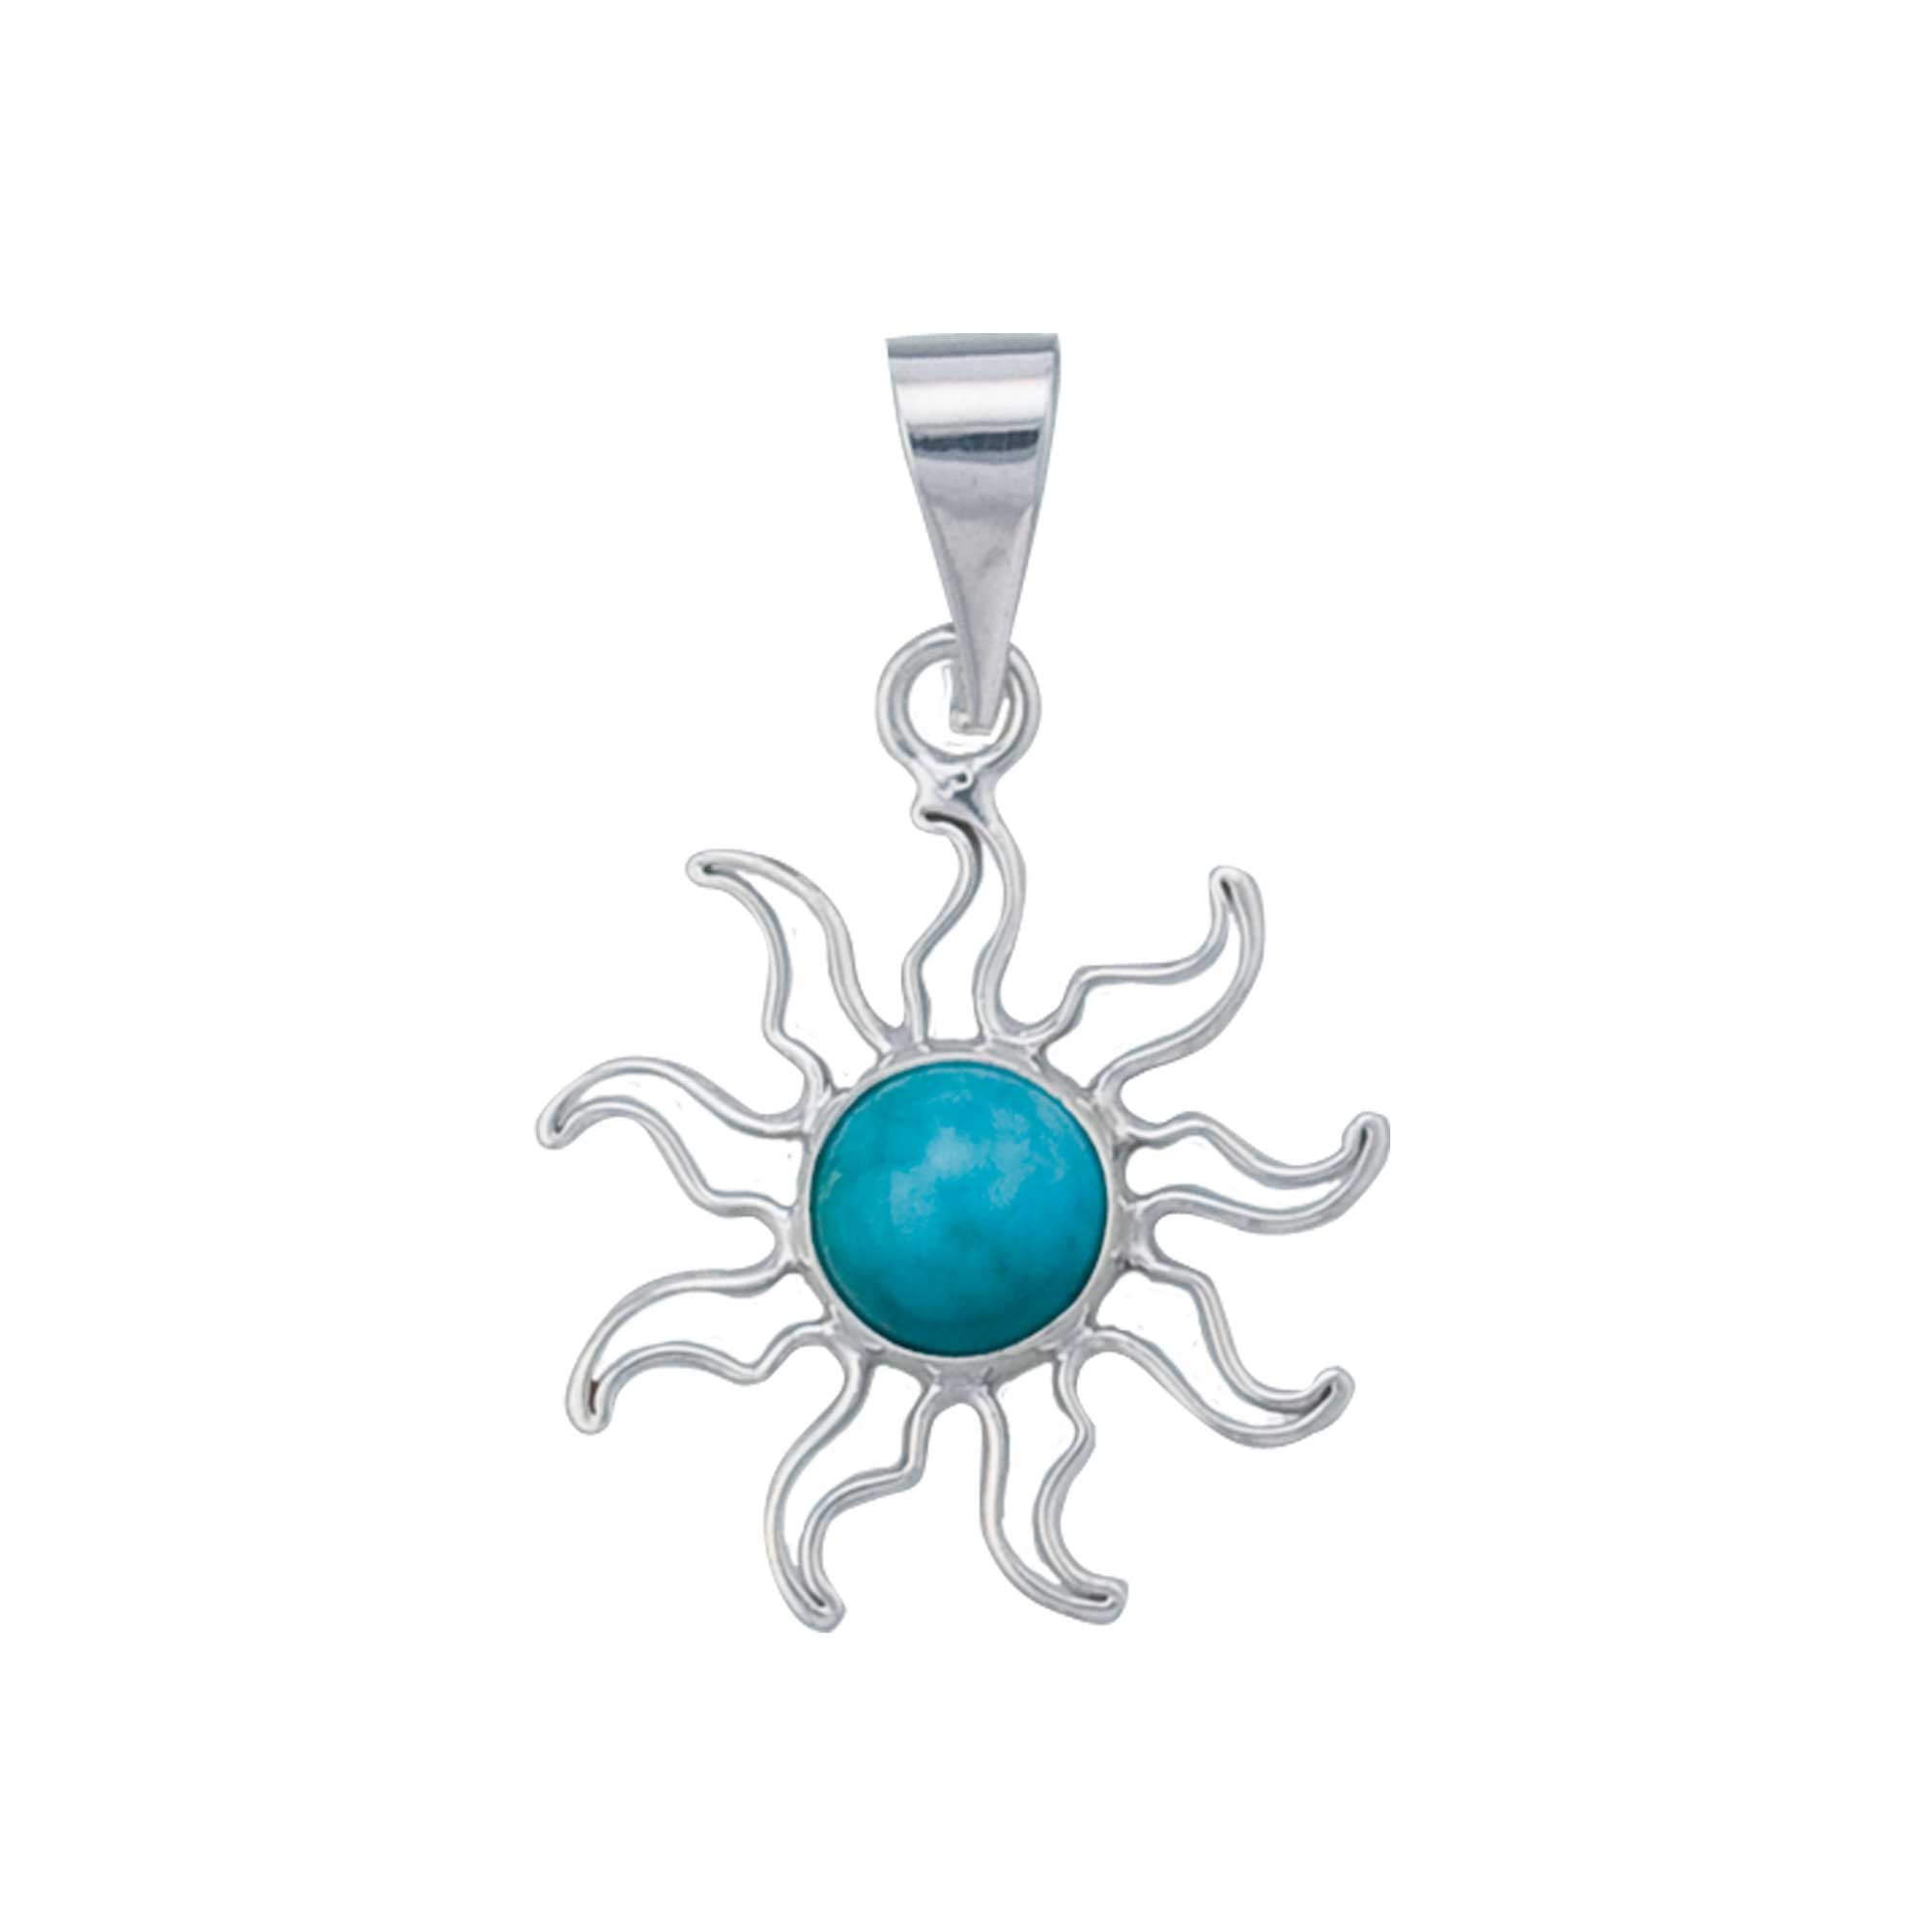 Sterling Silver Turquoise Sun Pendant | Charles Albert Jewelry